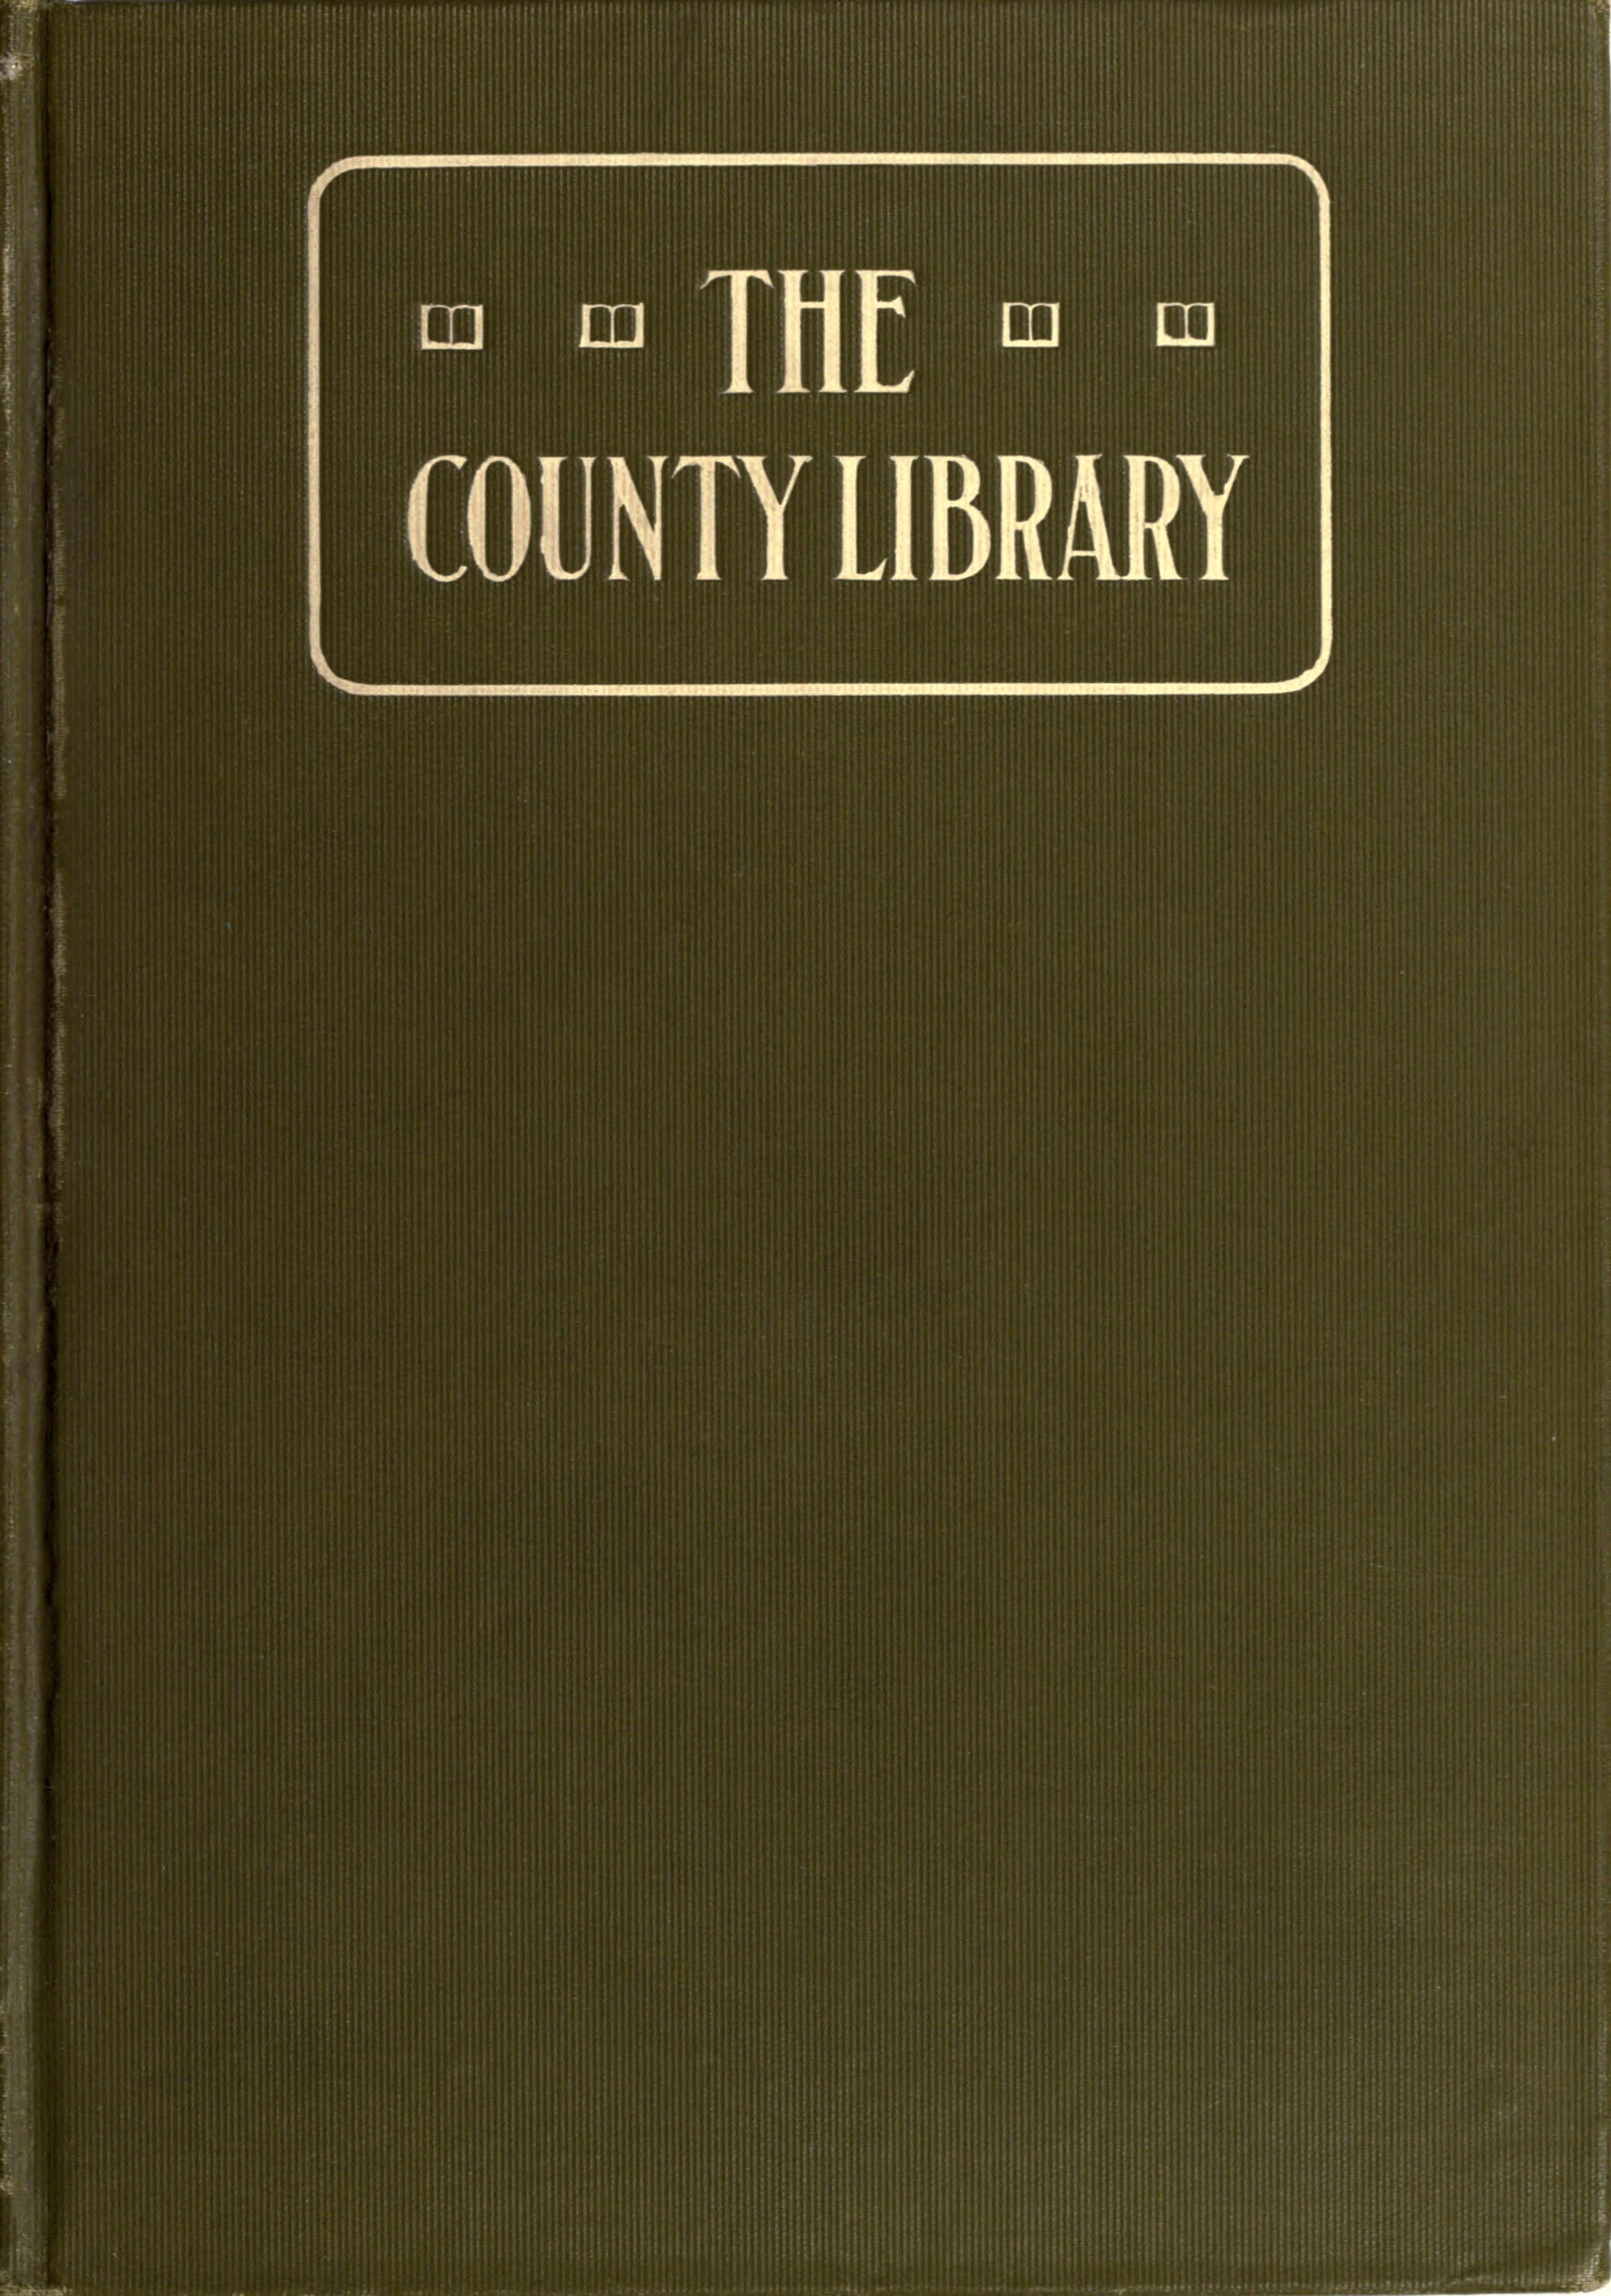 Cover of the Brumback Library book.